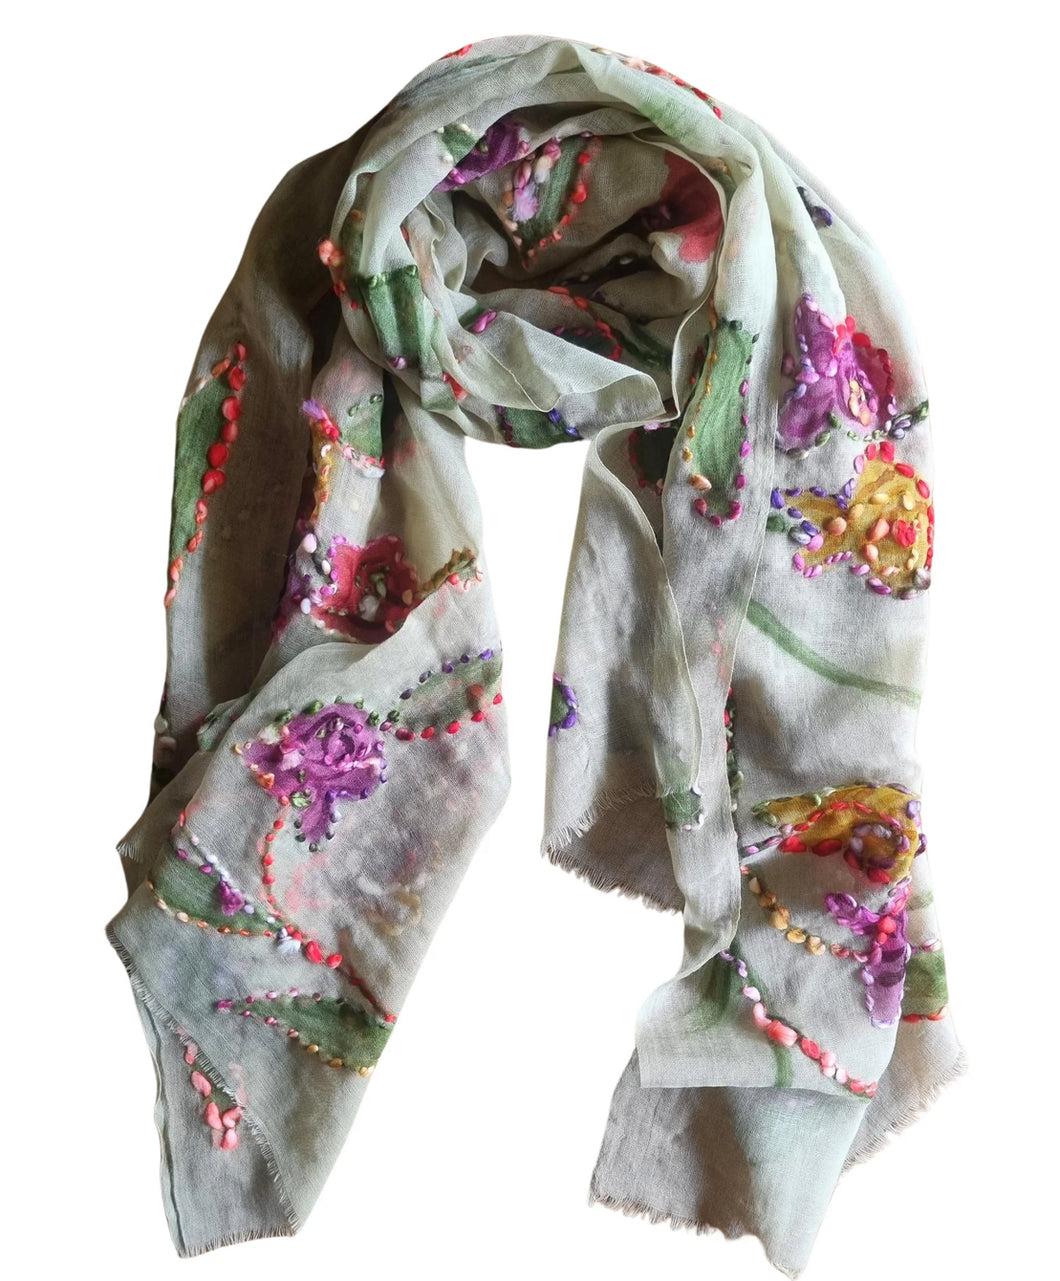 Painted and embroidered scarf nature